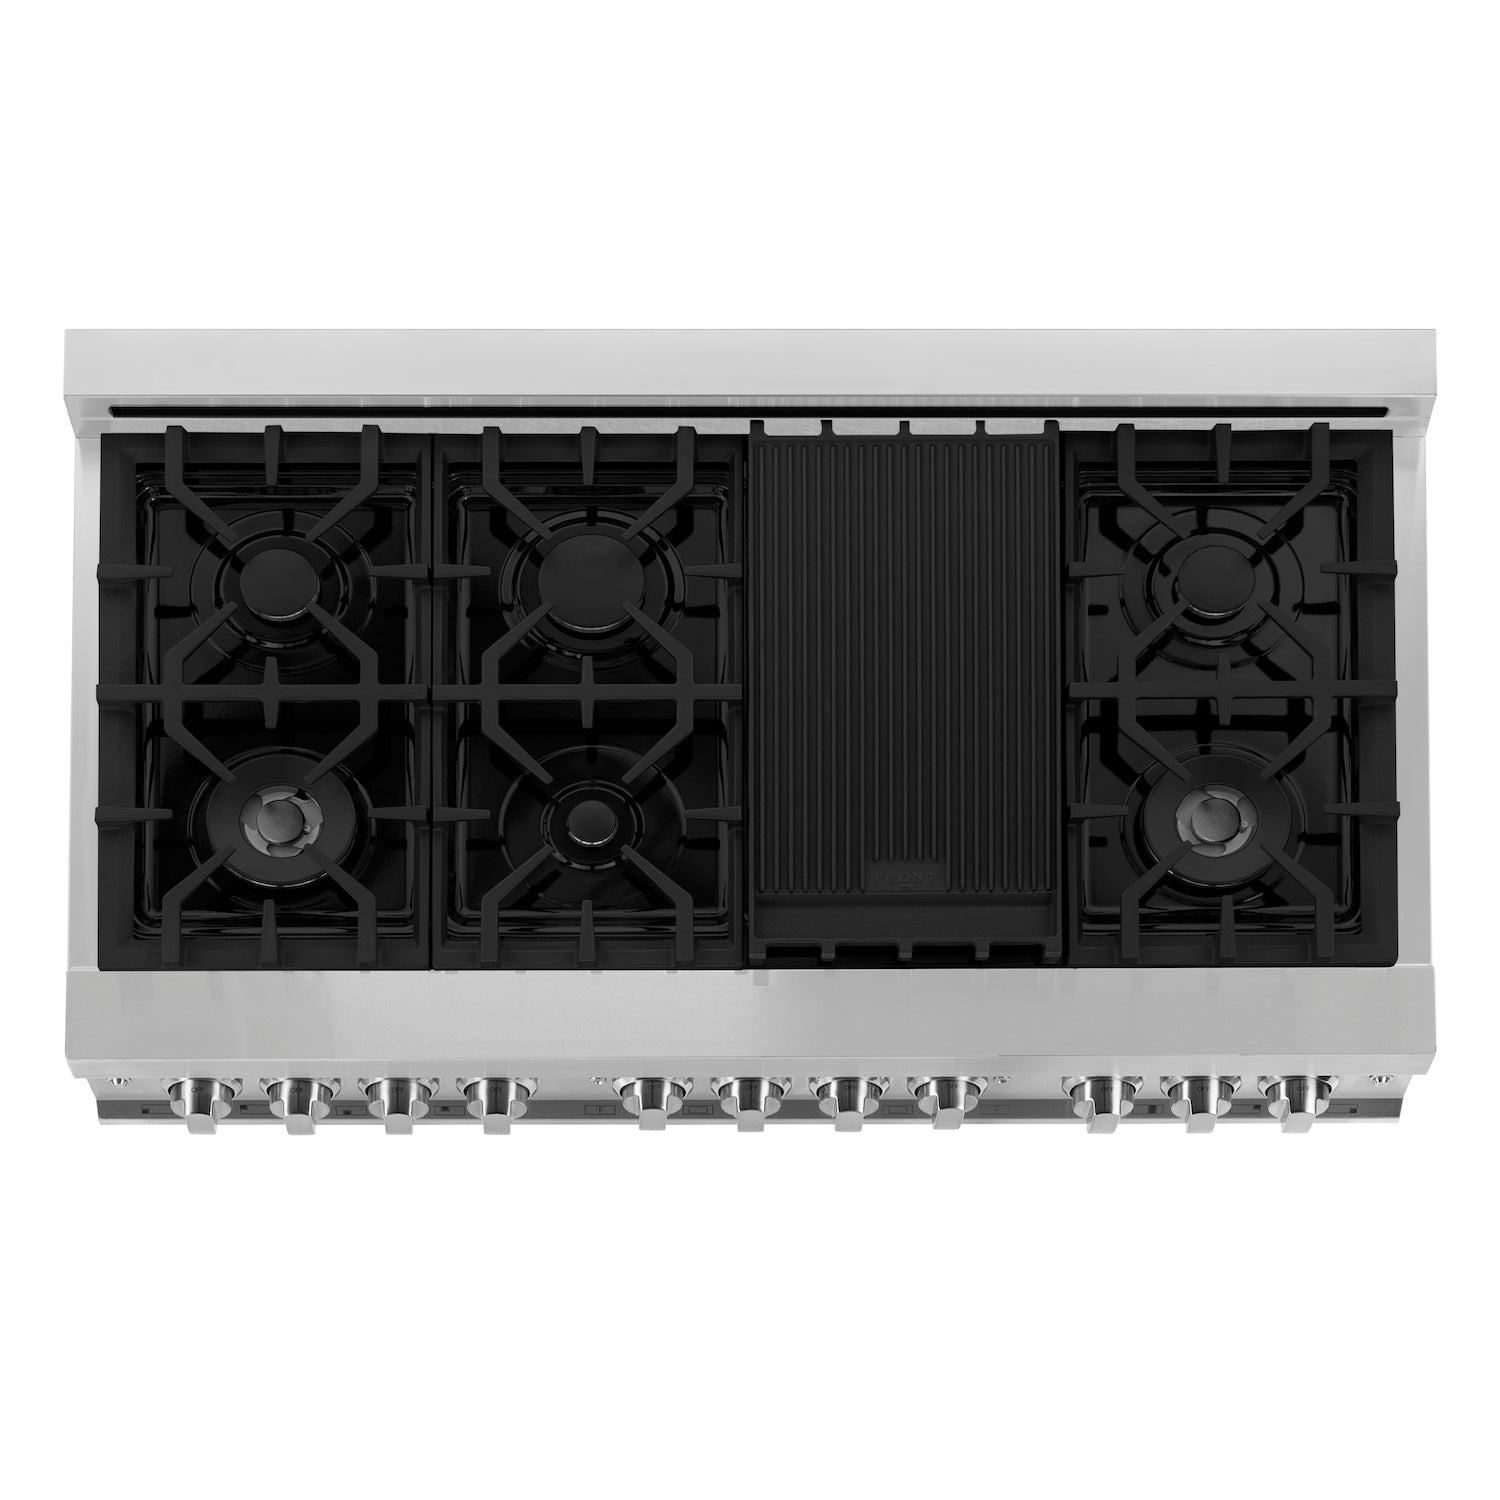 ZLINE 48 in. Professional Dual Fuel Range in Stainless Steel (RA48) from above showing cooktop with gas burners and cast-iron grates.